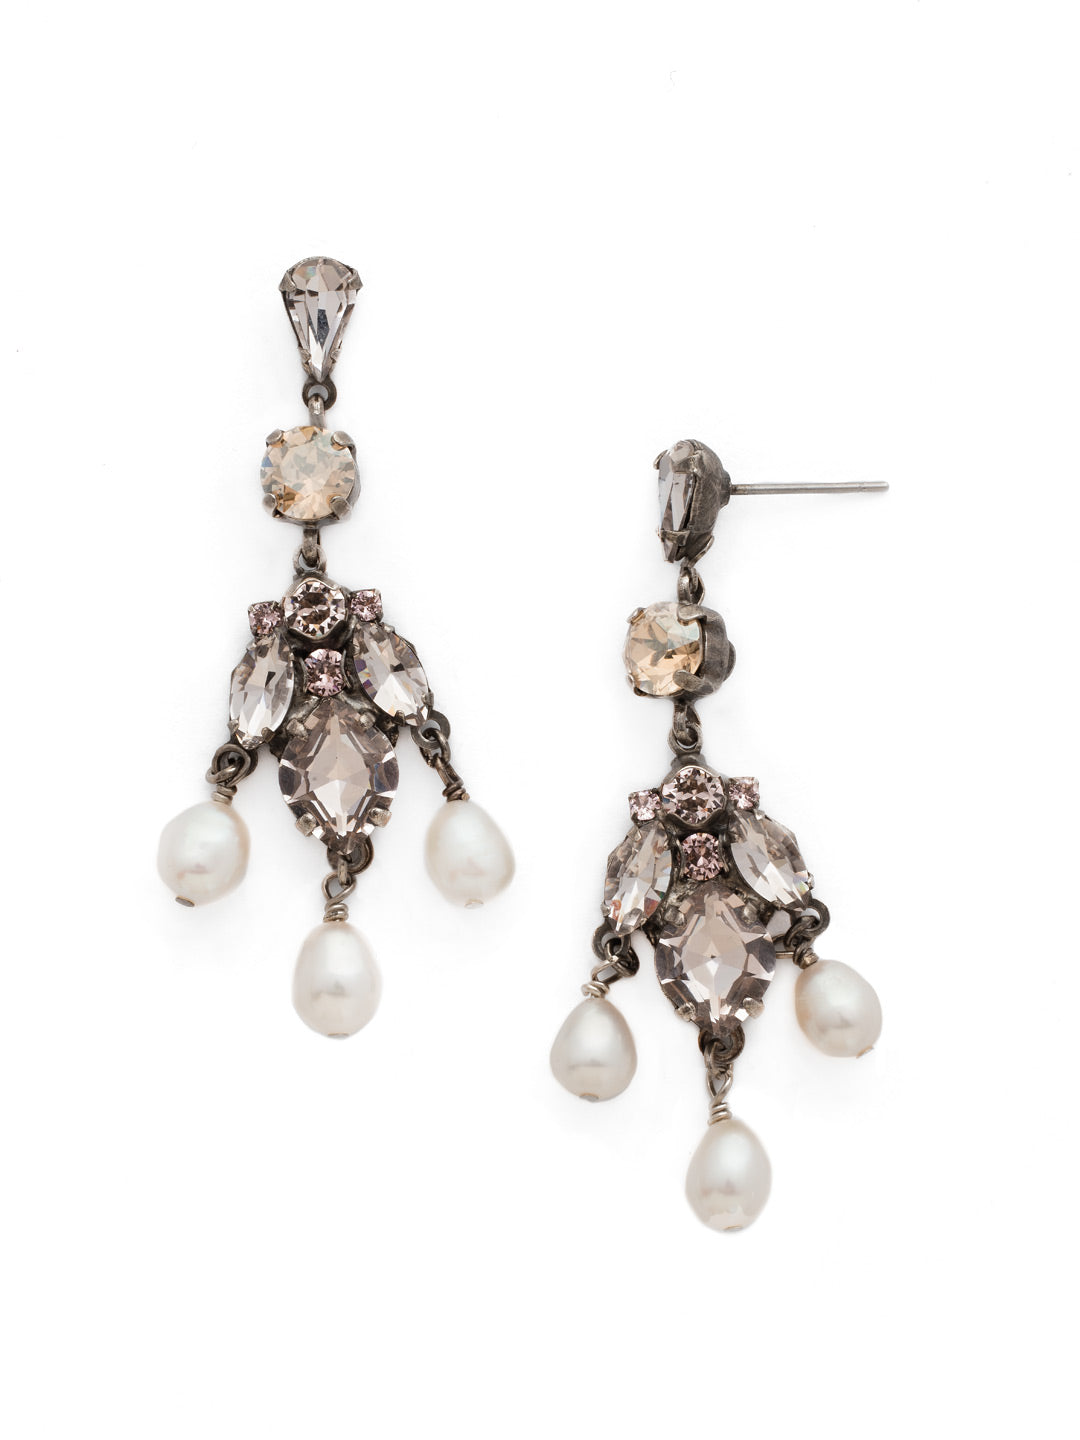 Lumiere Statement Earrings - EDP10ASSBL - <p>Light up your look with this dazzling chandelier design that incorporates elegant accent pearls for classic charm. From Sorrelli's Satin Blush collection in our Antique Silver-tone finish.</p>